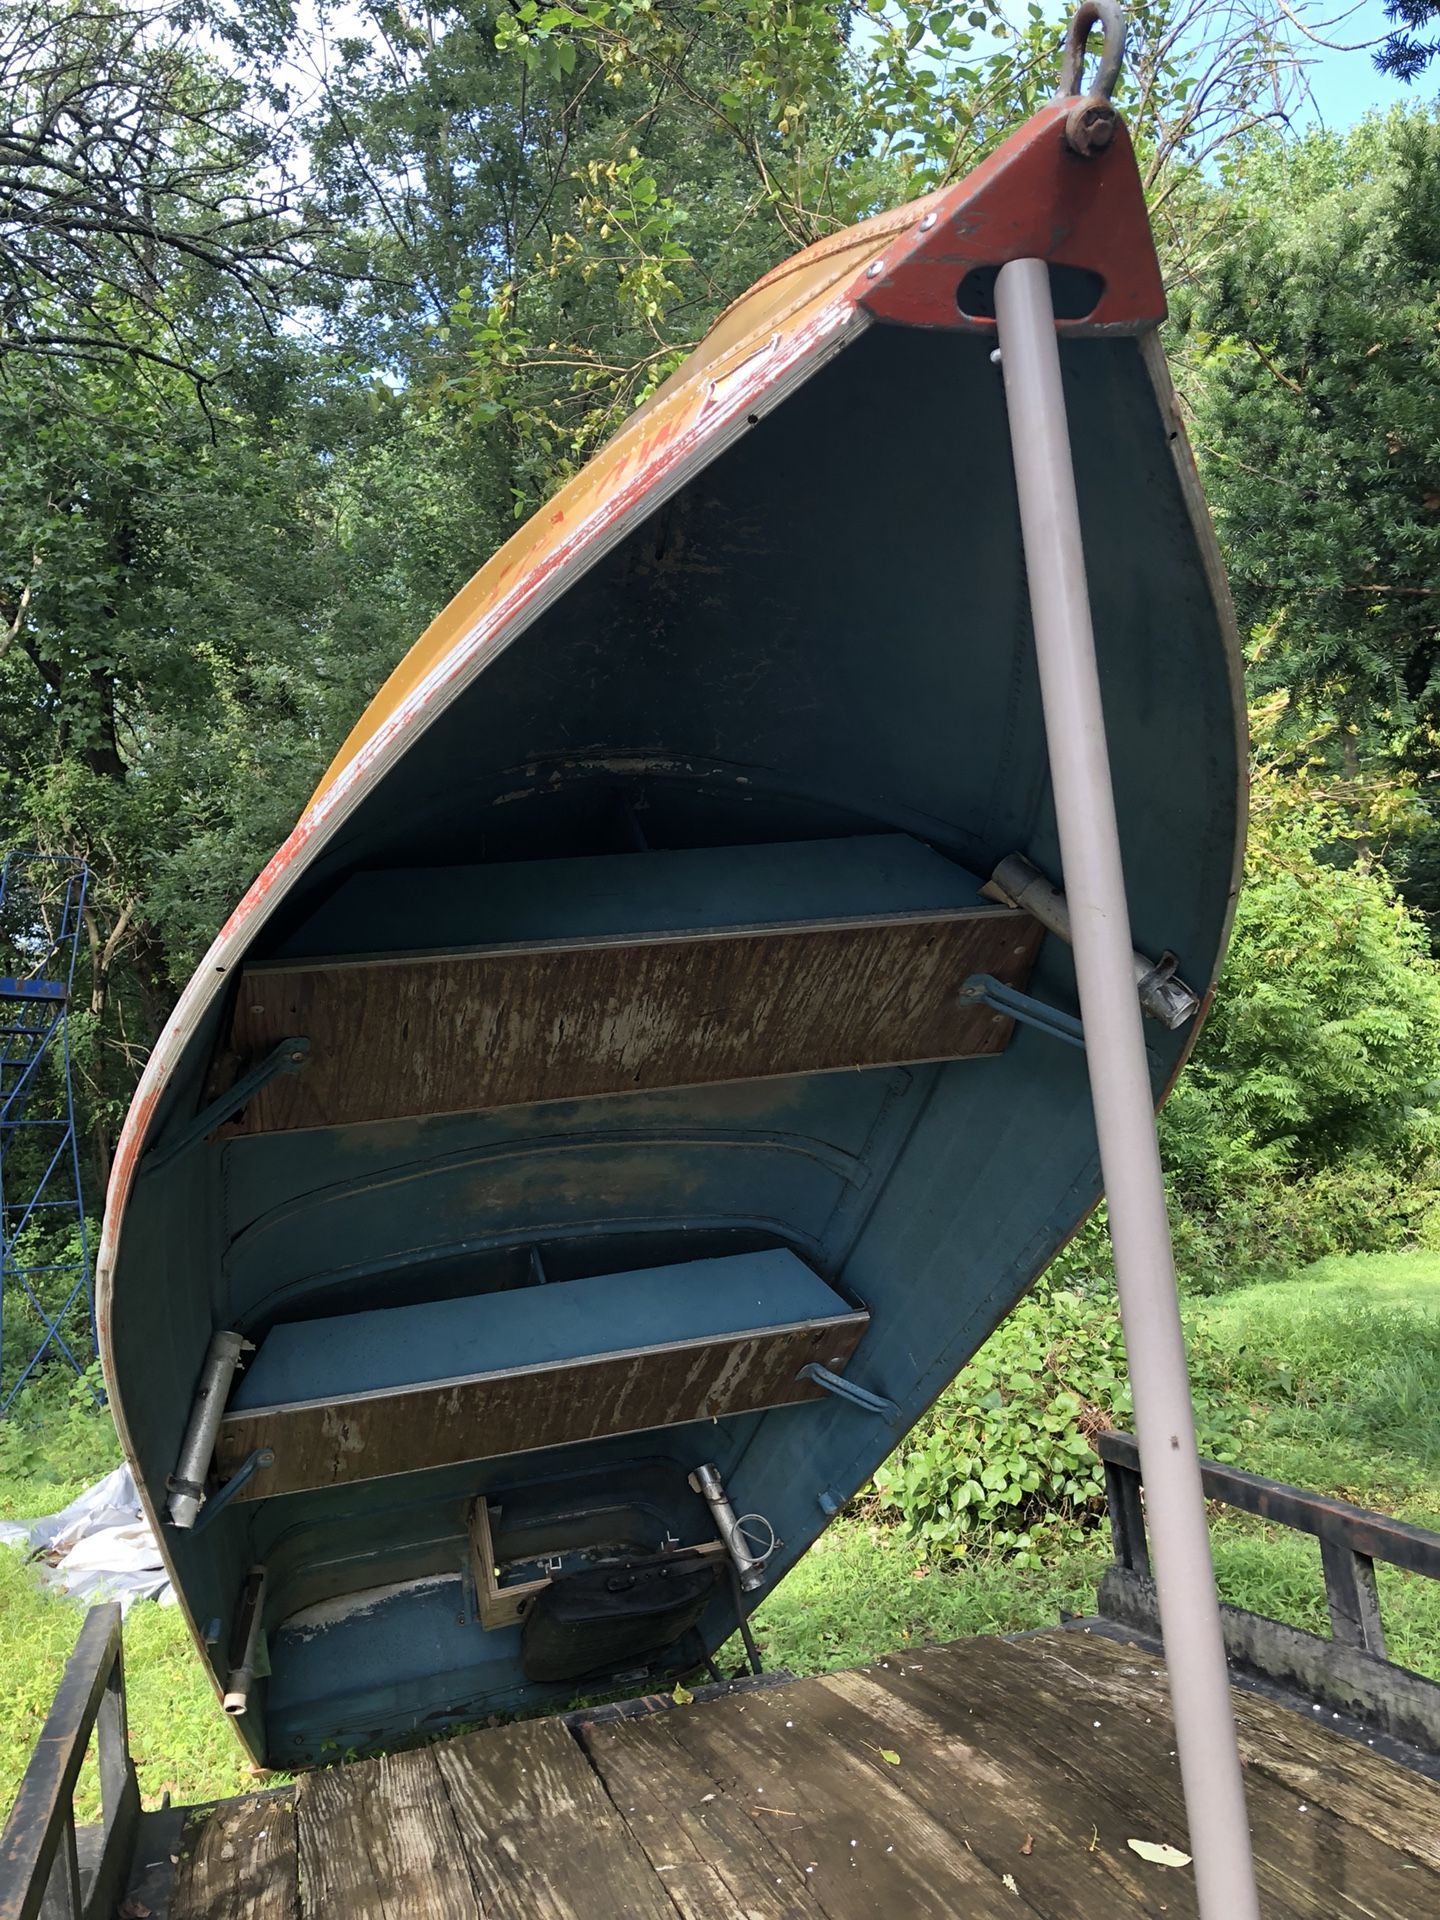 15’ Montgomery ward sea king aluminum boat. No motor with deal. Taking best offers.